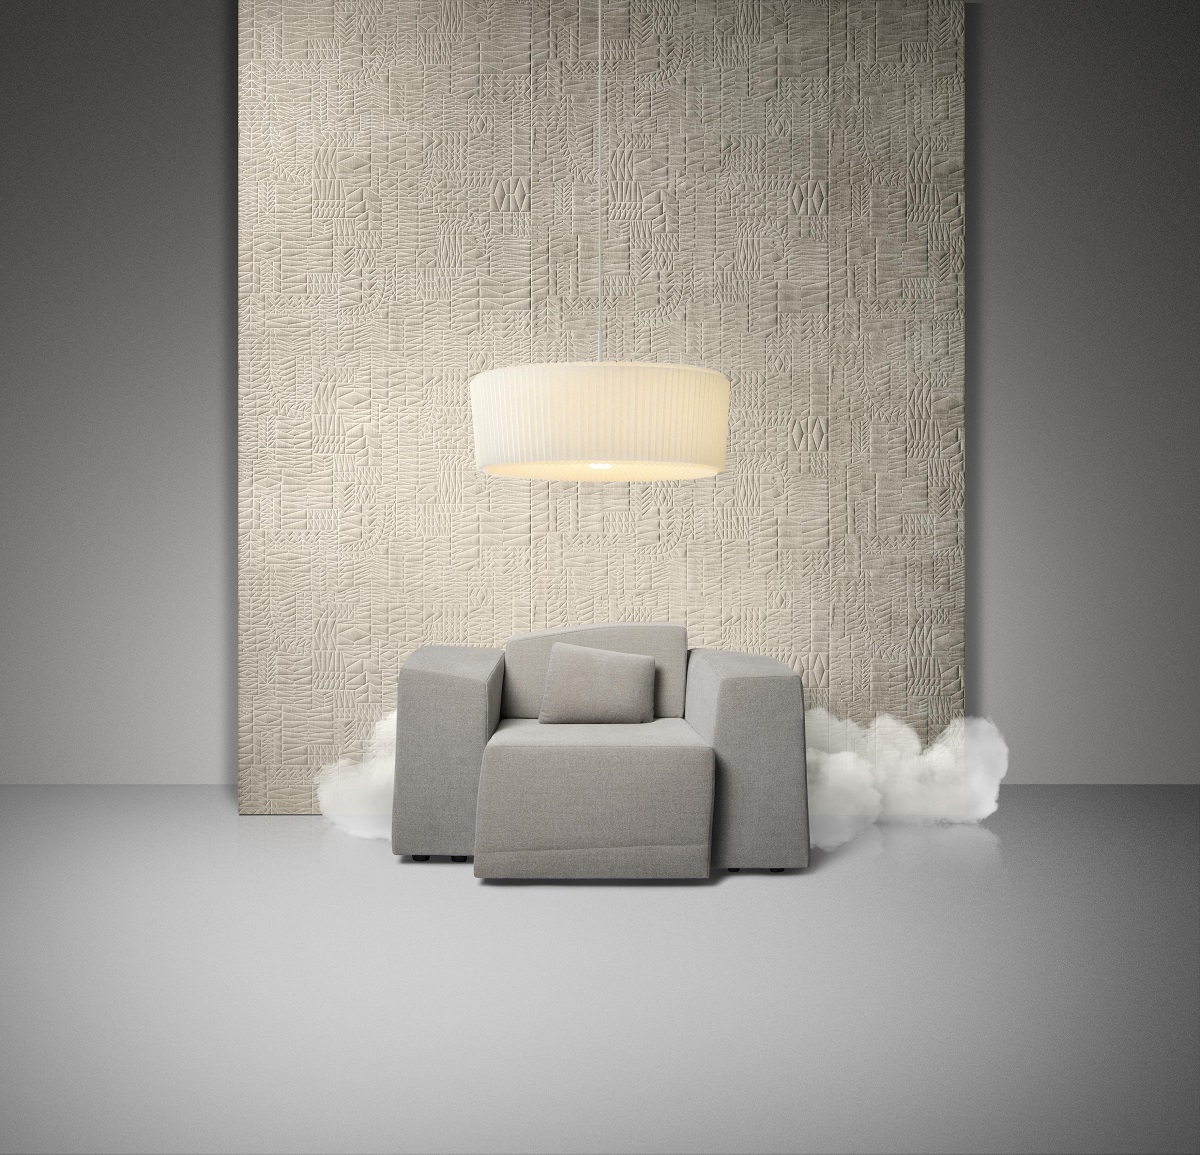 Pogo goat is a a 3D wallcovering with a soft chenille fabric